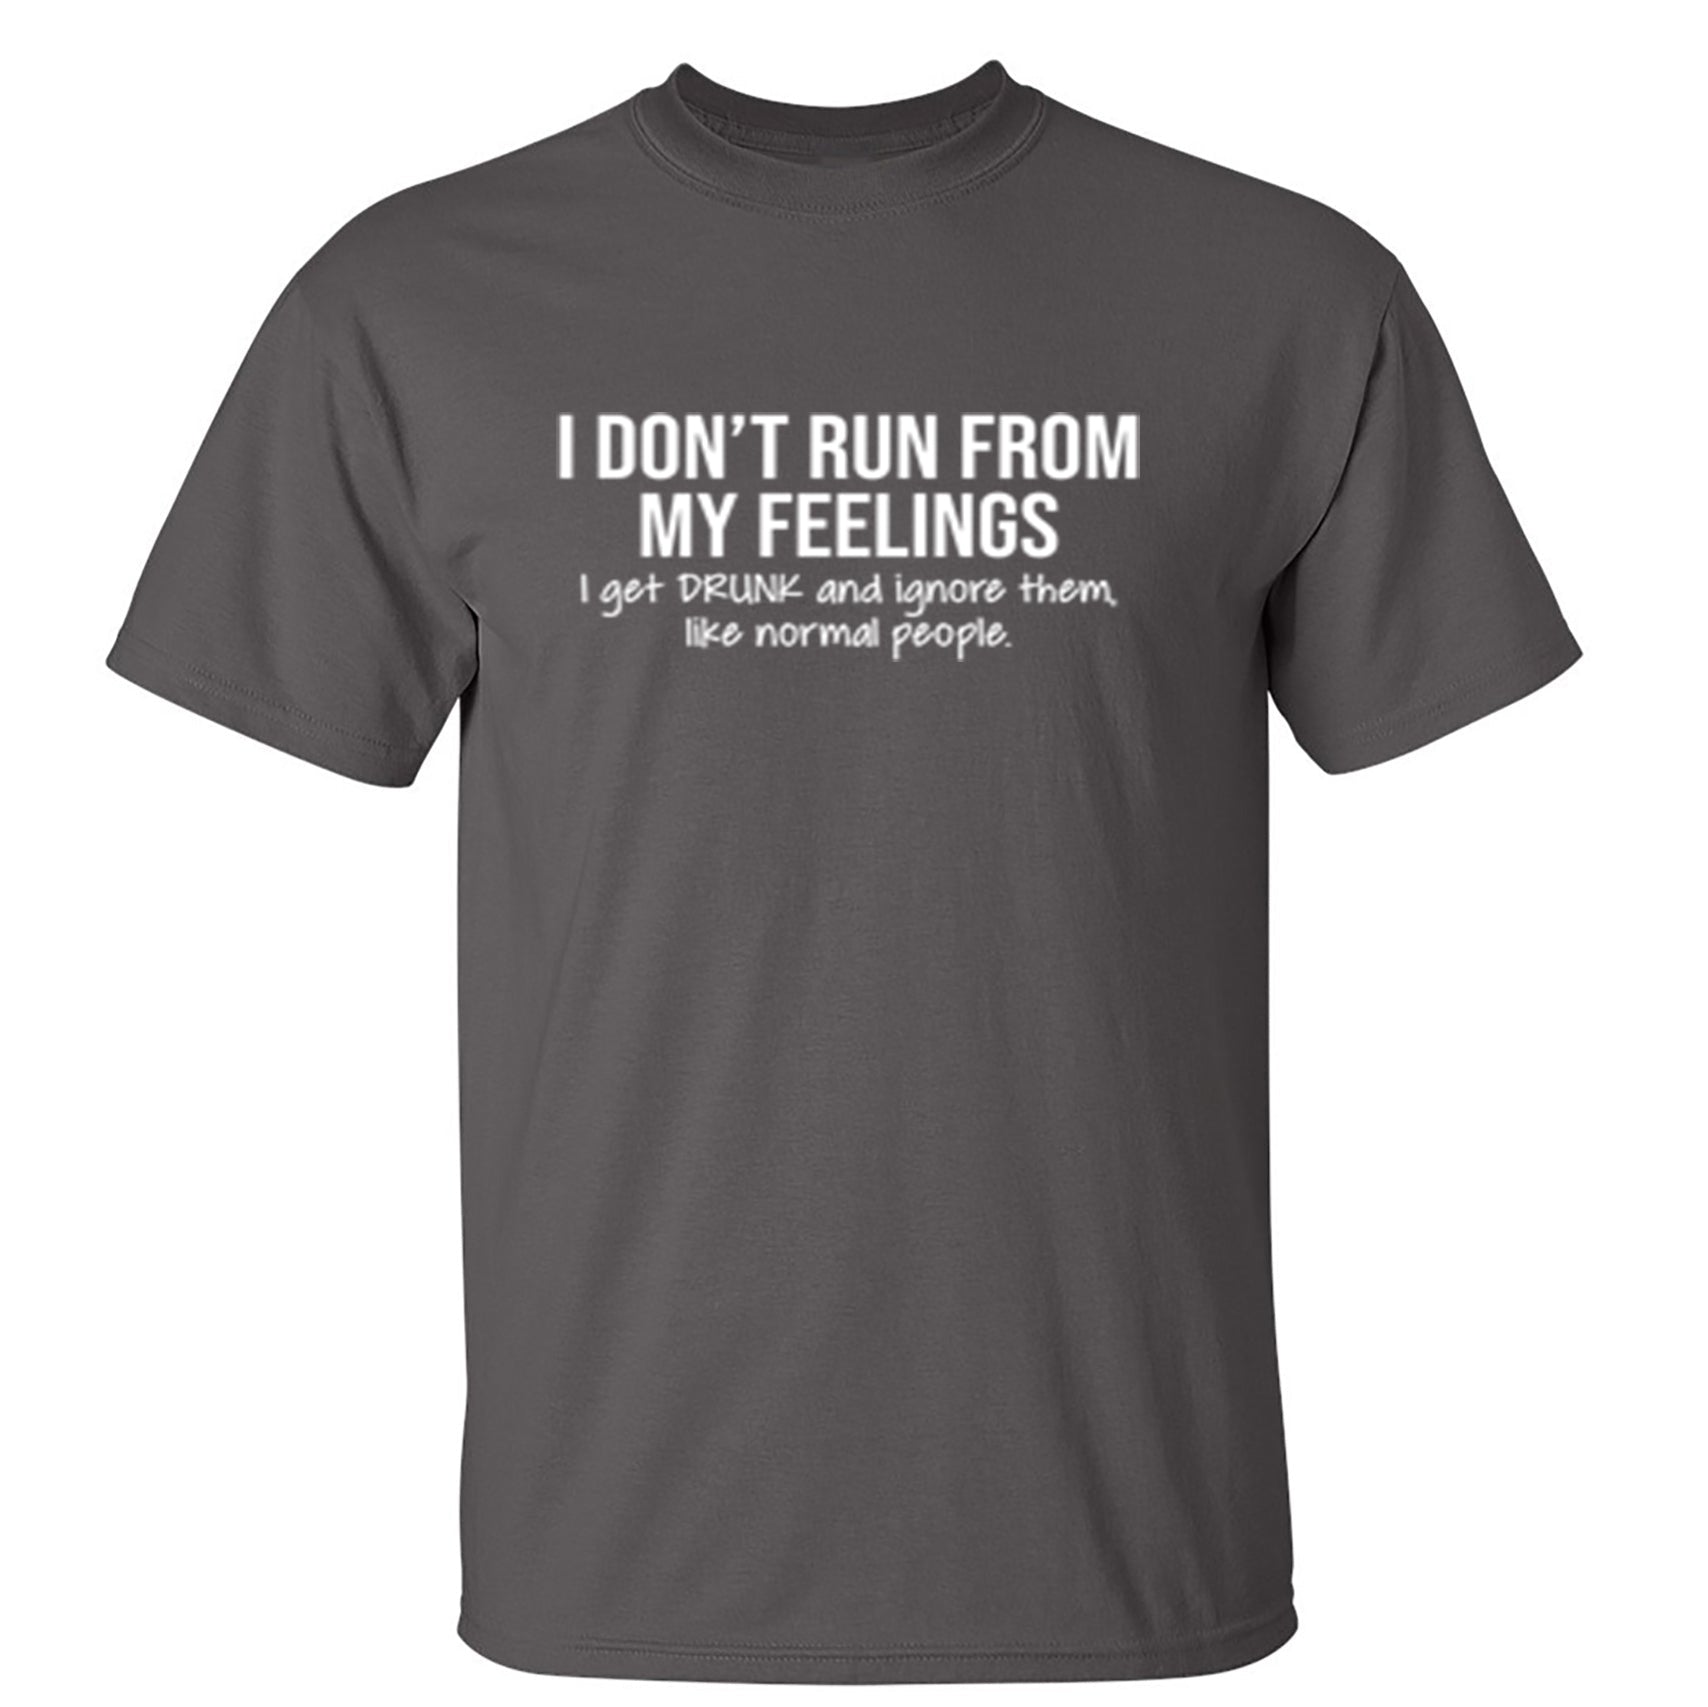 I Don't Run From My Feelings - Funny T Shirts & Graphic Tees